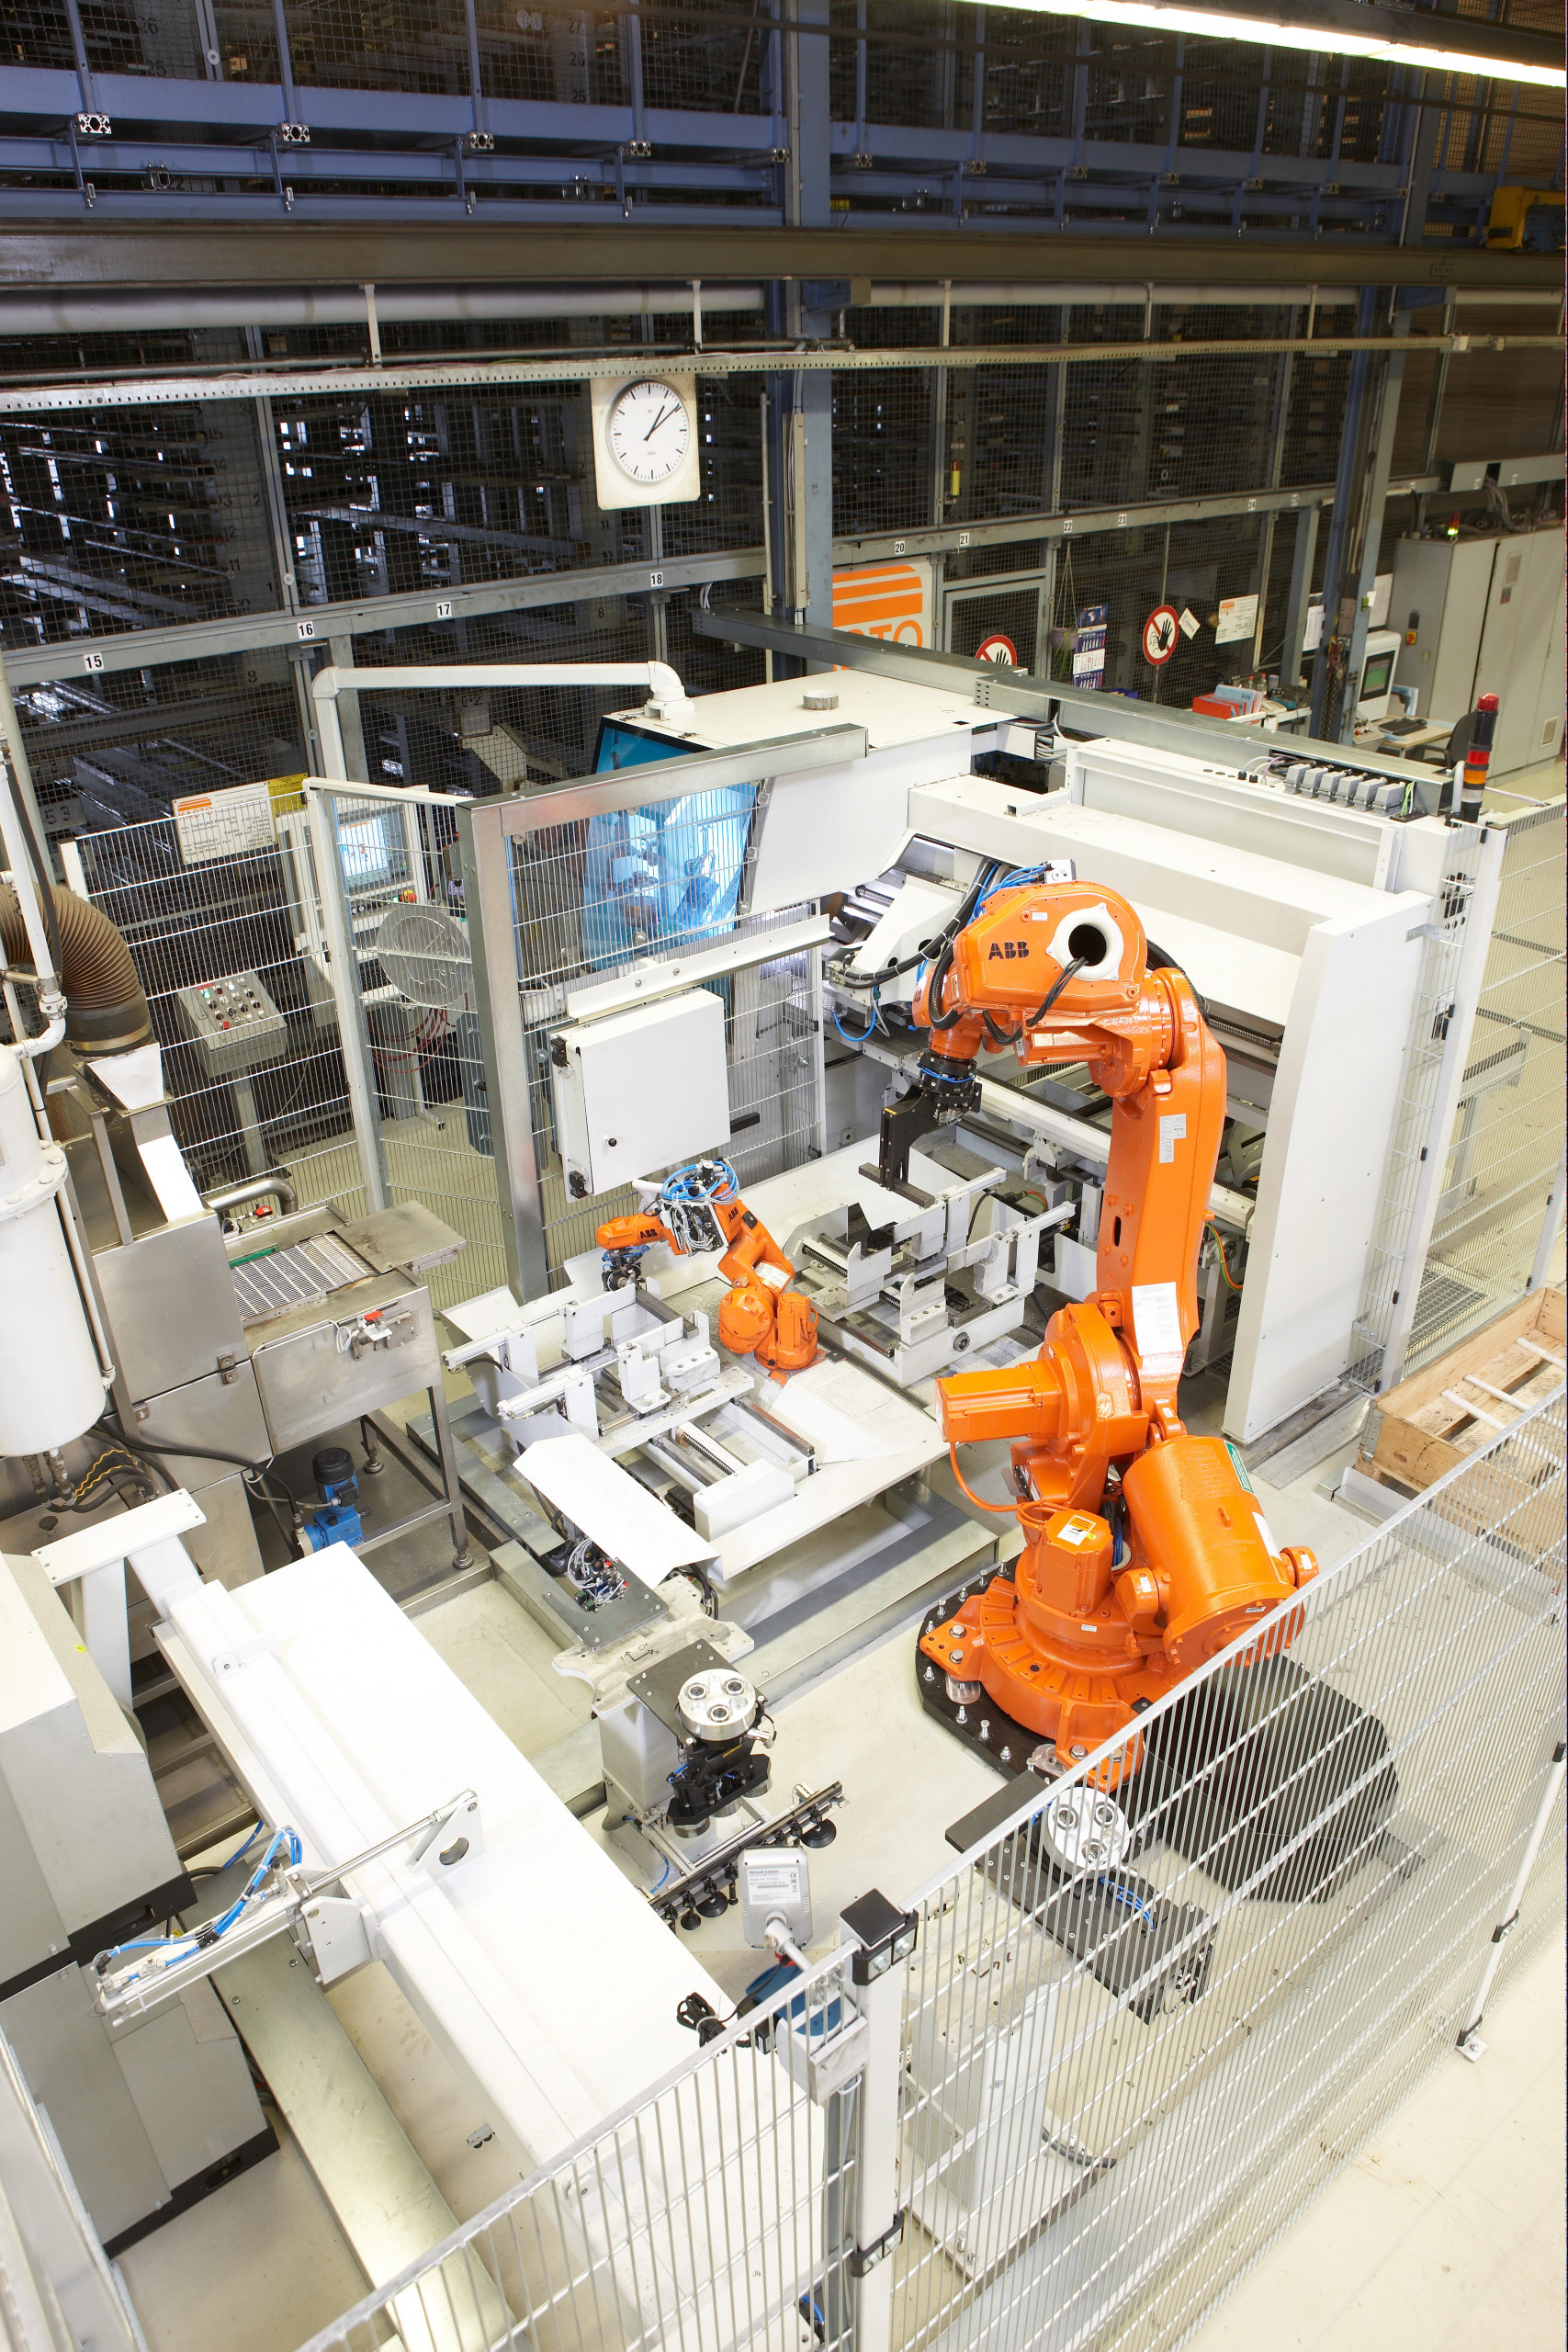 Kastosort is a robot handling system for palletizing and picking workpieces directly at the saw. Kasto Maschinenbau GmbH & Co KG